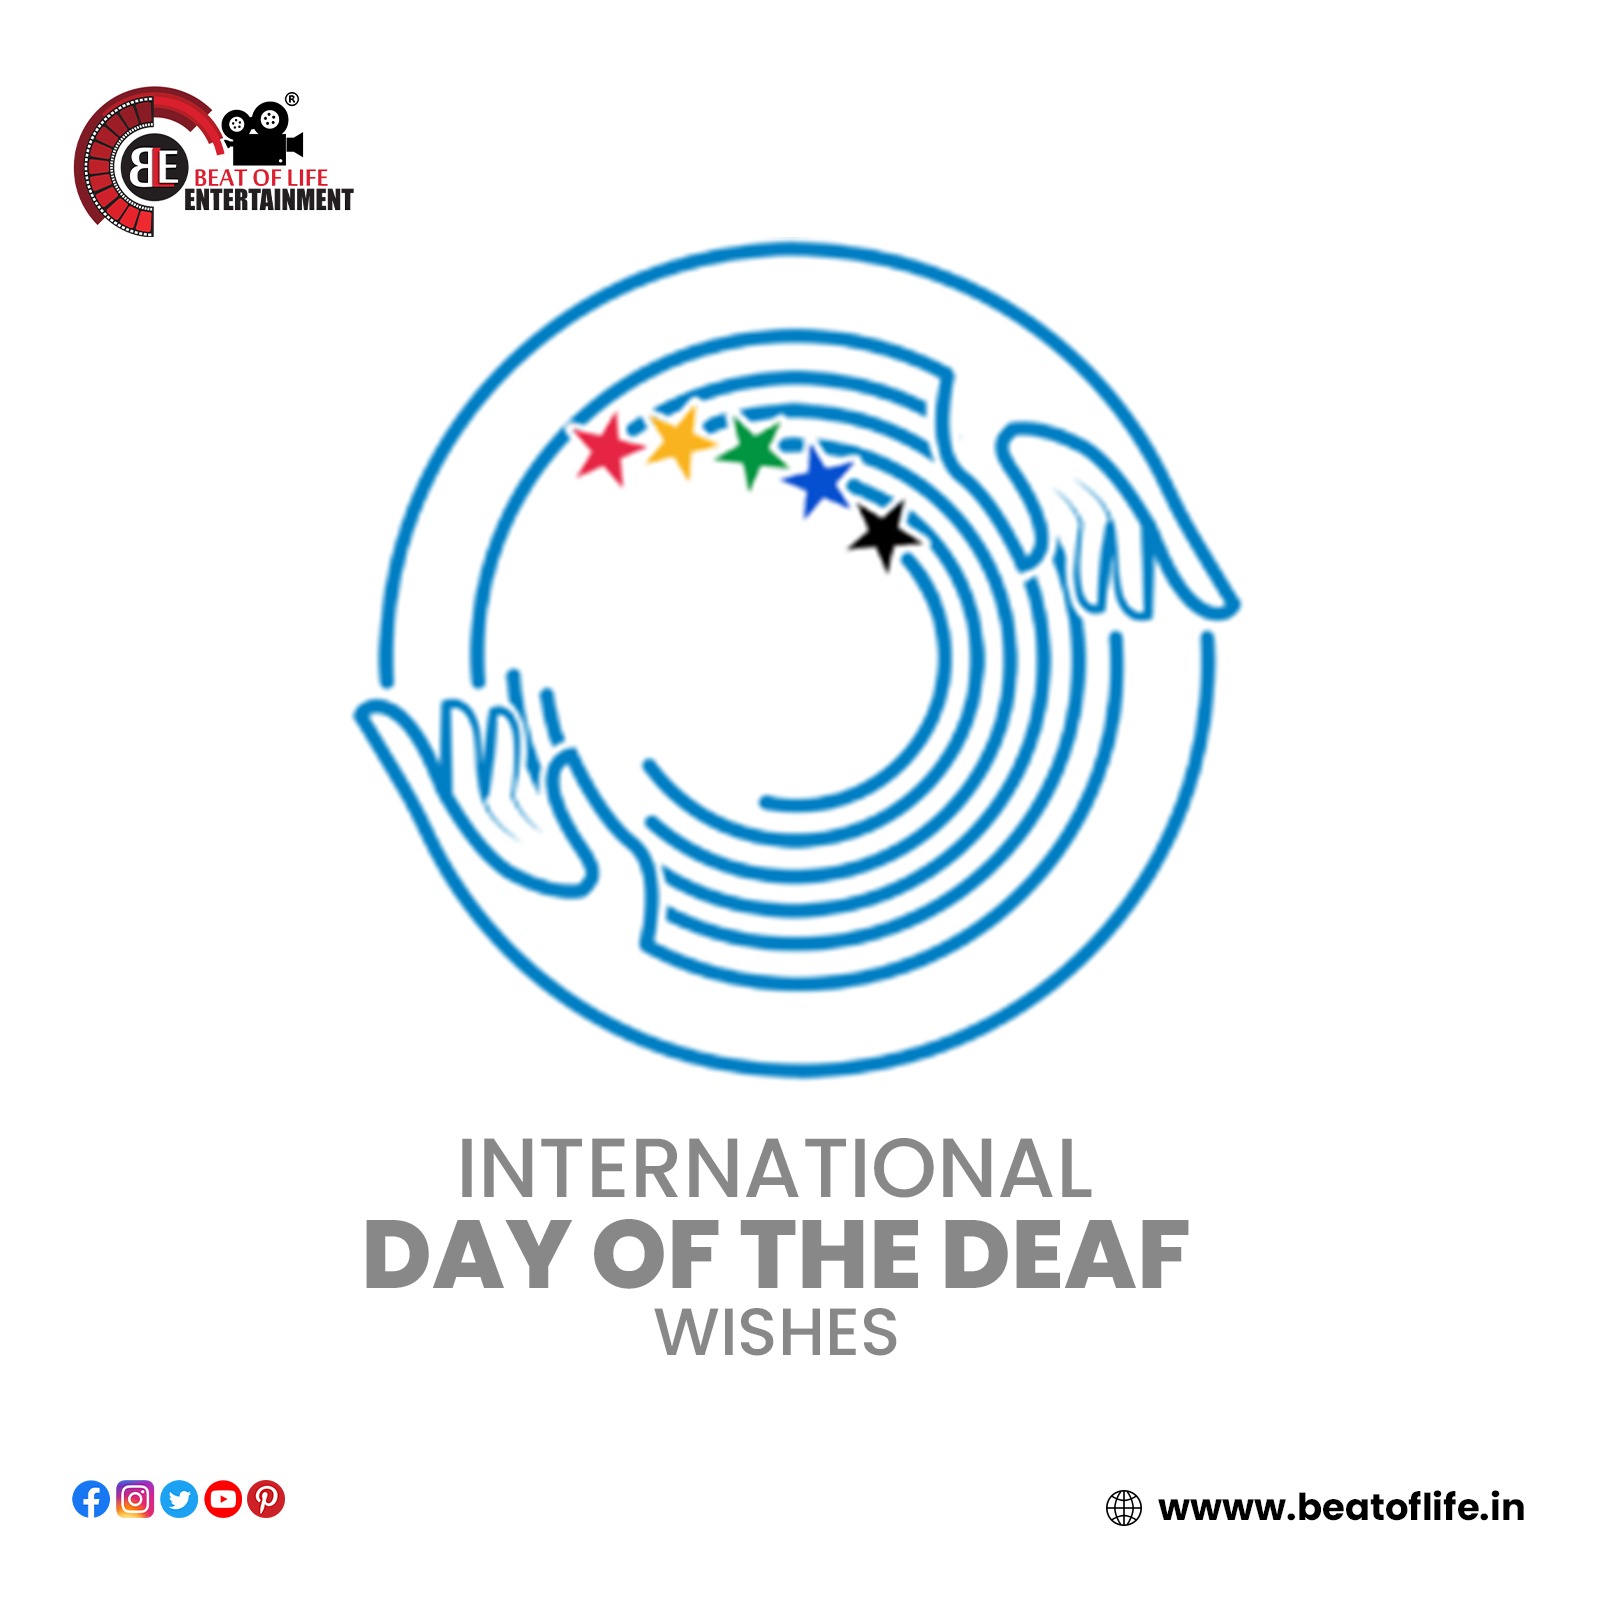 International Day of the Deaf wishes